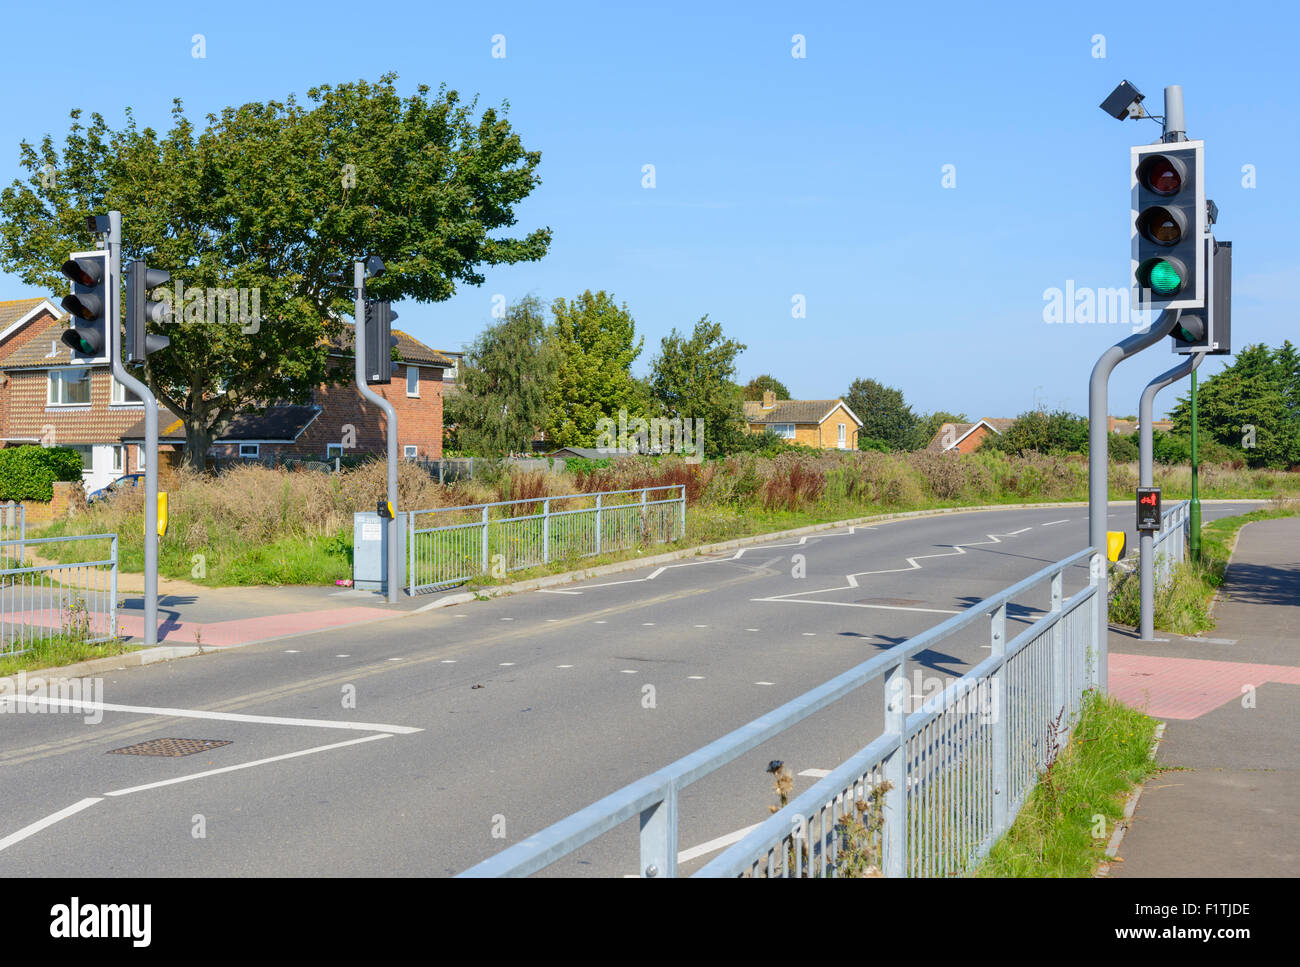 Toucan crossing for pedestrians and cyclists on a road in England UK. Stock Photo